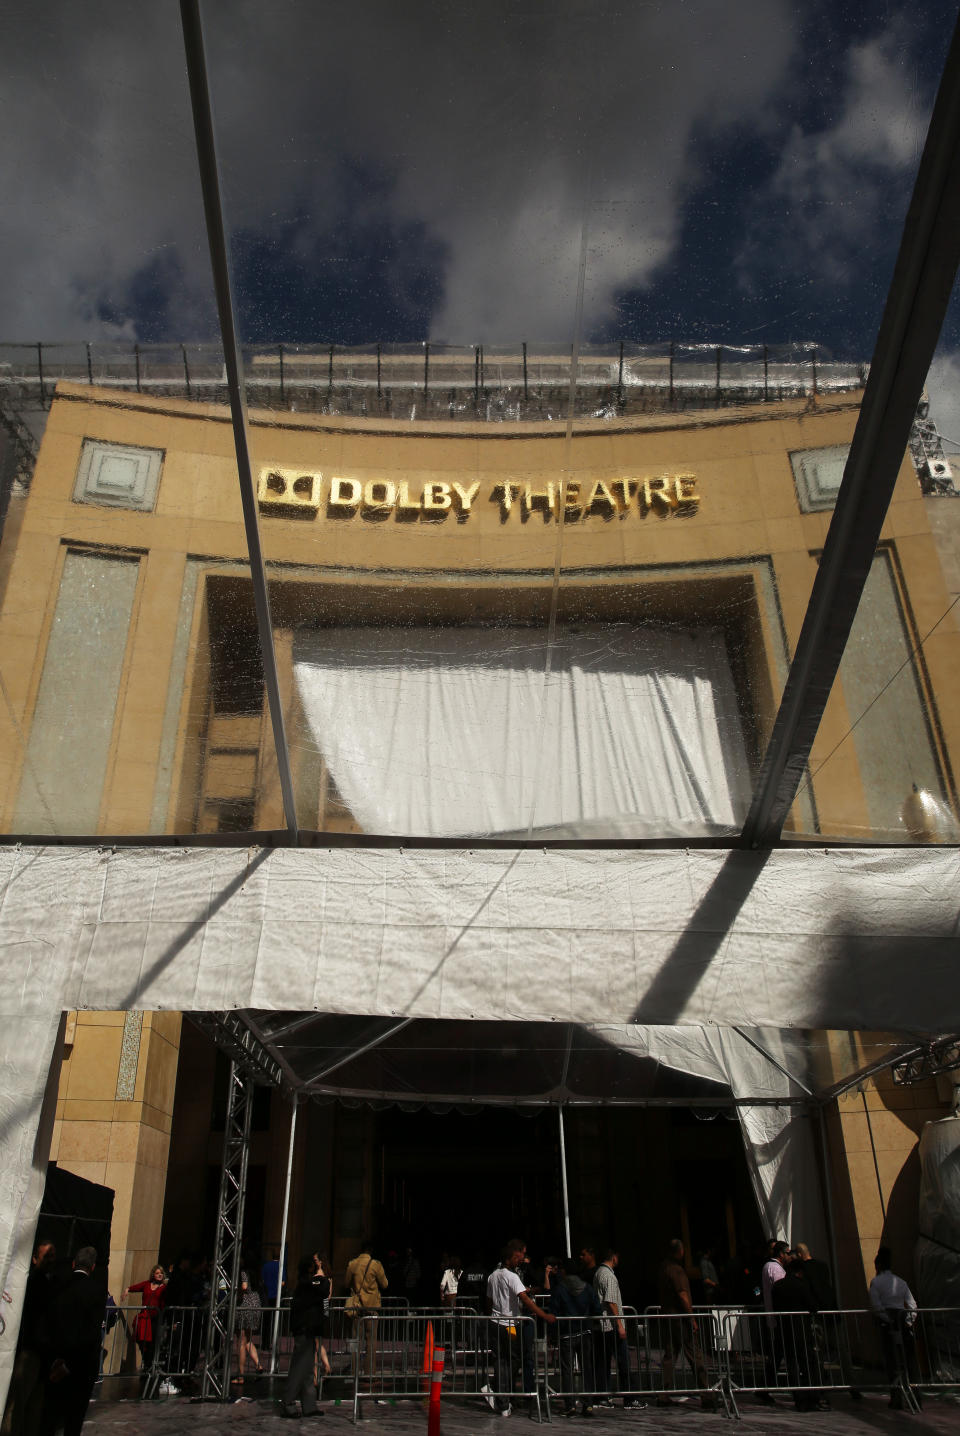 The Dolby Theatre is seen through a tent as preparations are made for the 86th Academy Awards in Los Angeles, Thursday, Feb. 27, 2014. The Academy Awards will be held at the Dolby Theatre on Sunday, March 2. (Photo by Matt Sayles/Invision/AP)